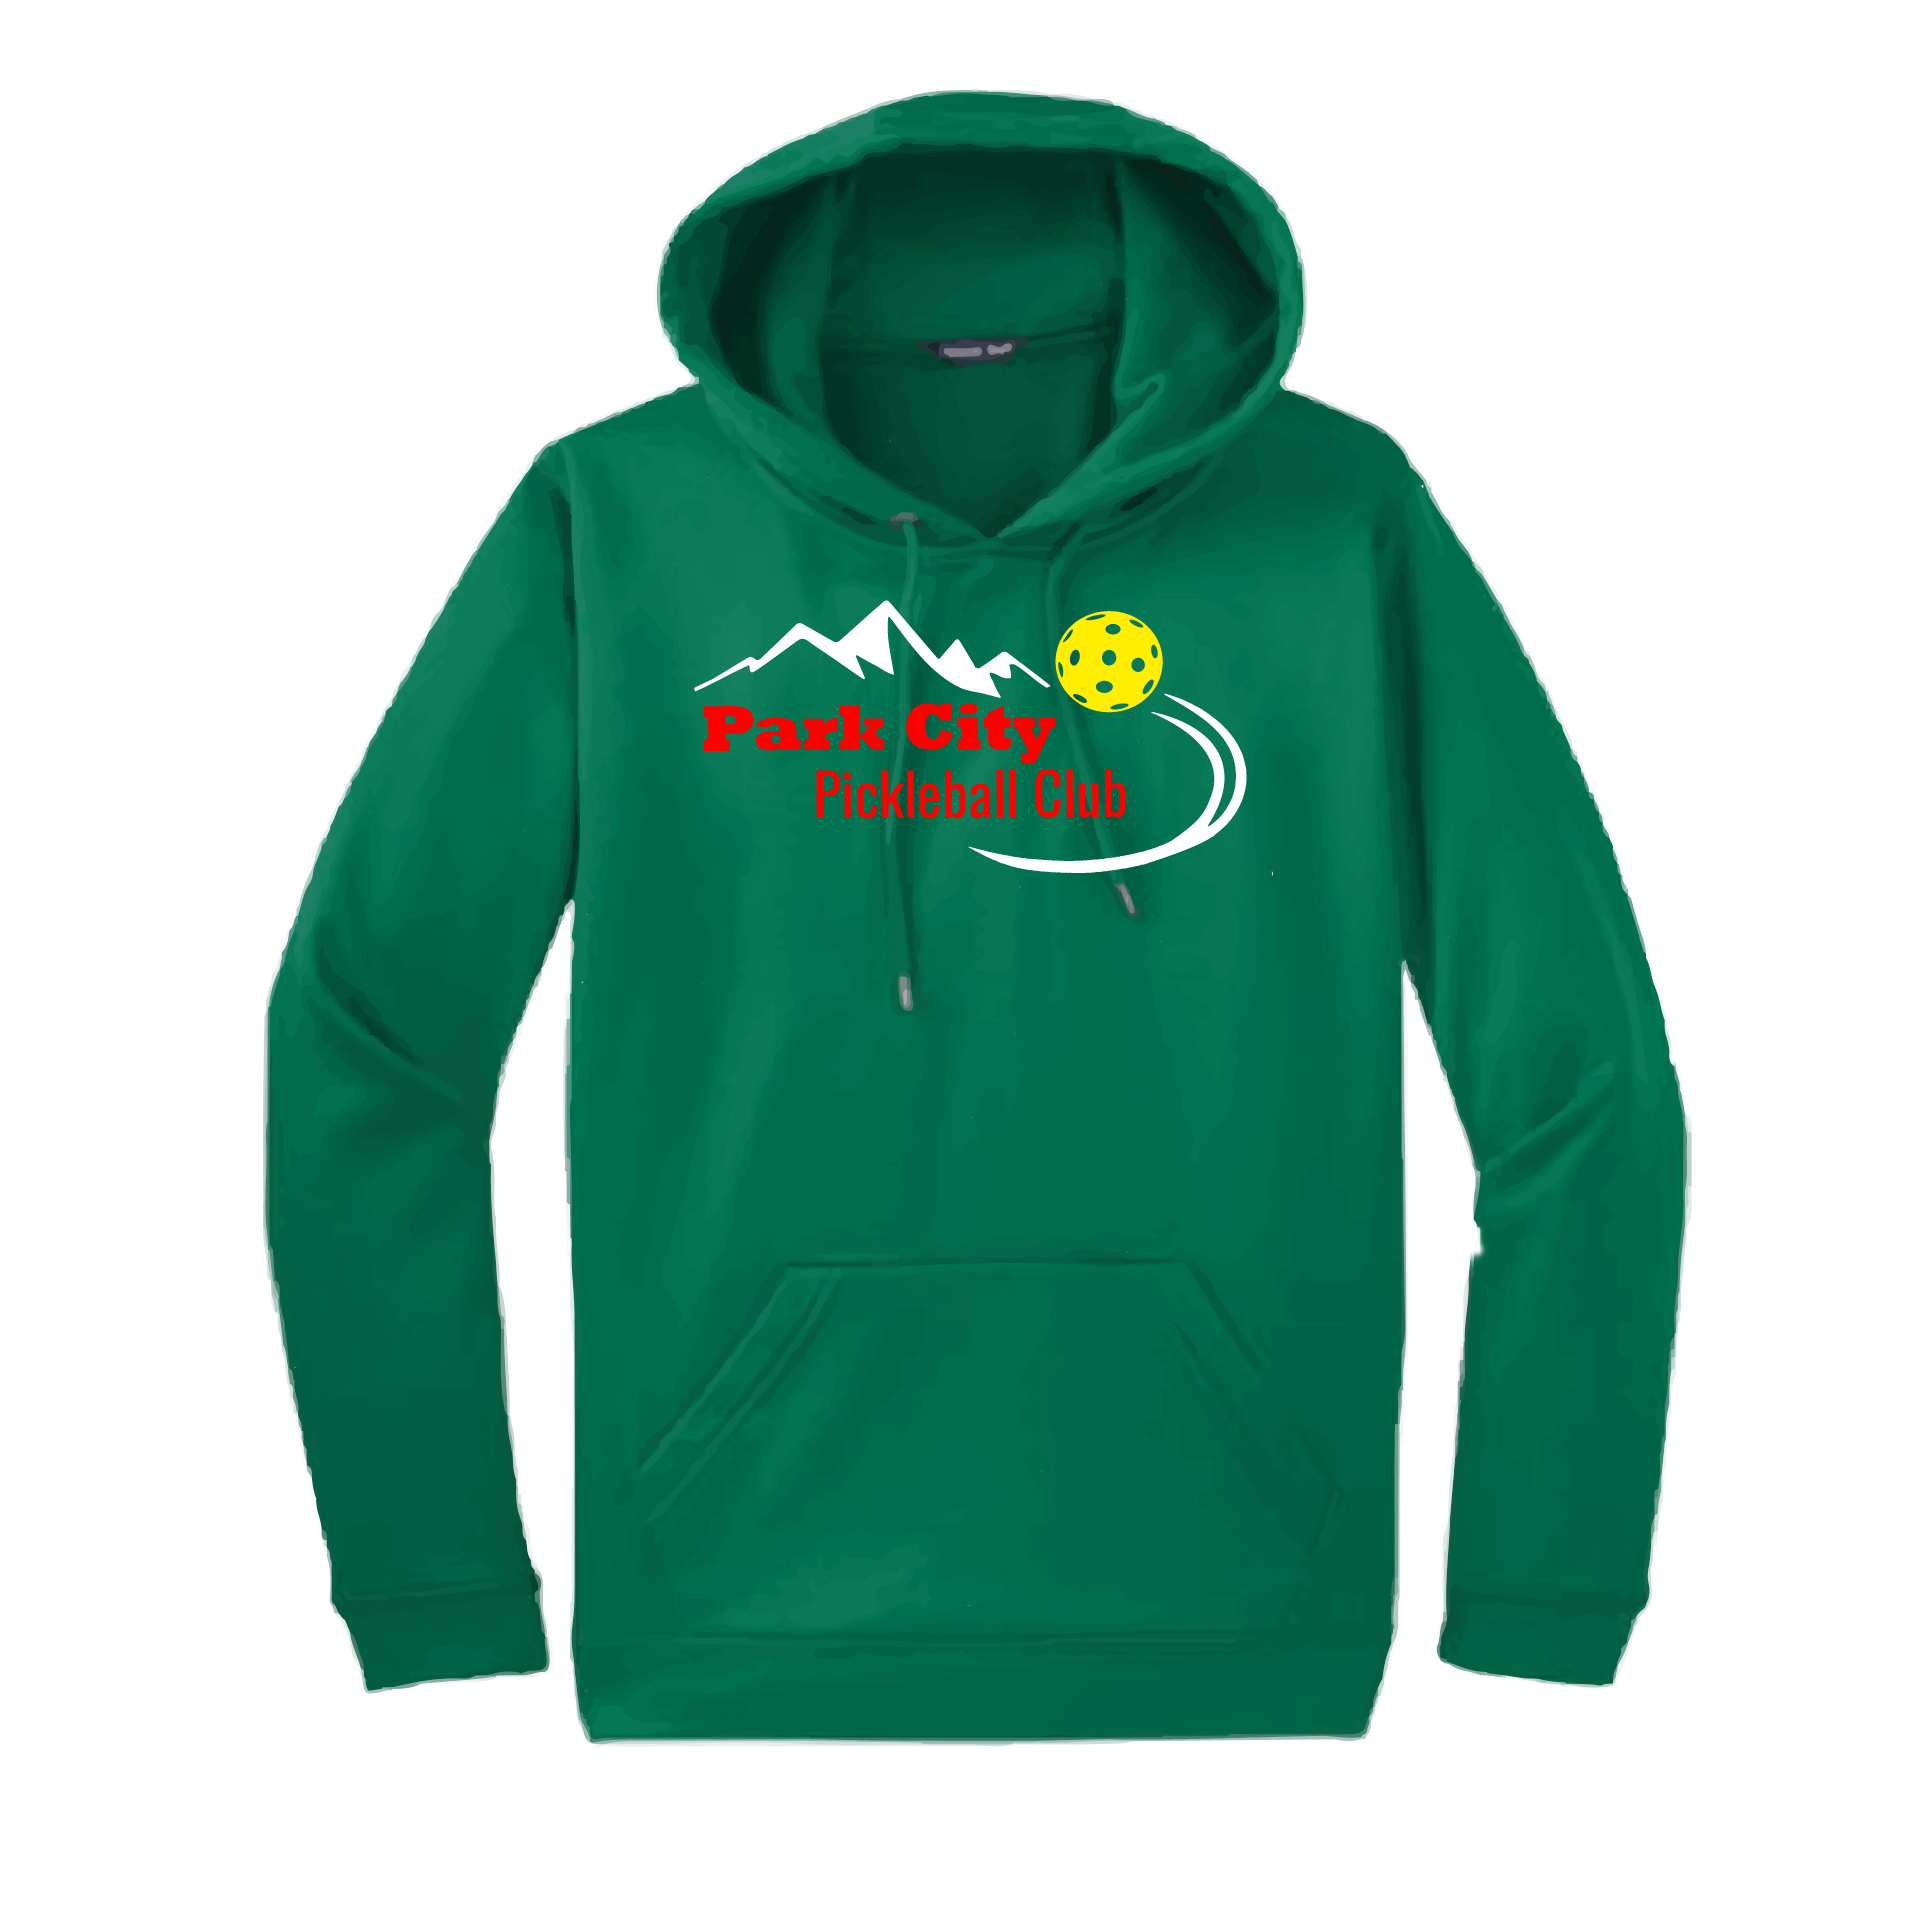 Pickleball Design: Park City Pickleball Club (red words)  Unisex Hooded Sweatshirt: Moisture-wicking, double-lined hood, front pouch pocket.  This unisex hooded sweatshirt is ultra comfortable and soft. Stay warm on the Pickleball courts while being that hit with this one of kind design.